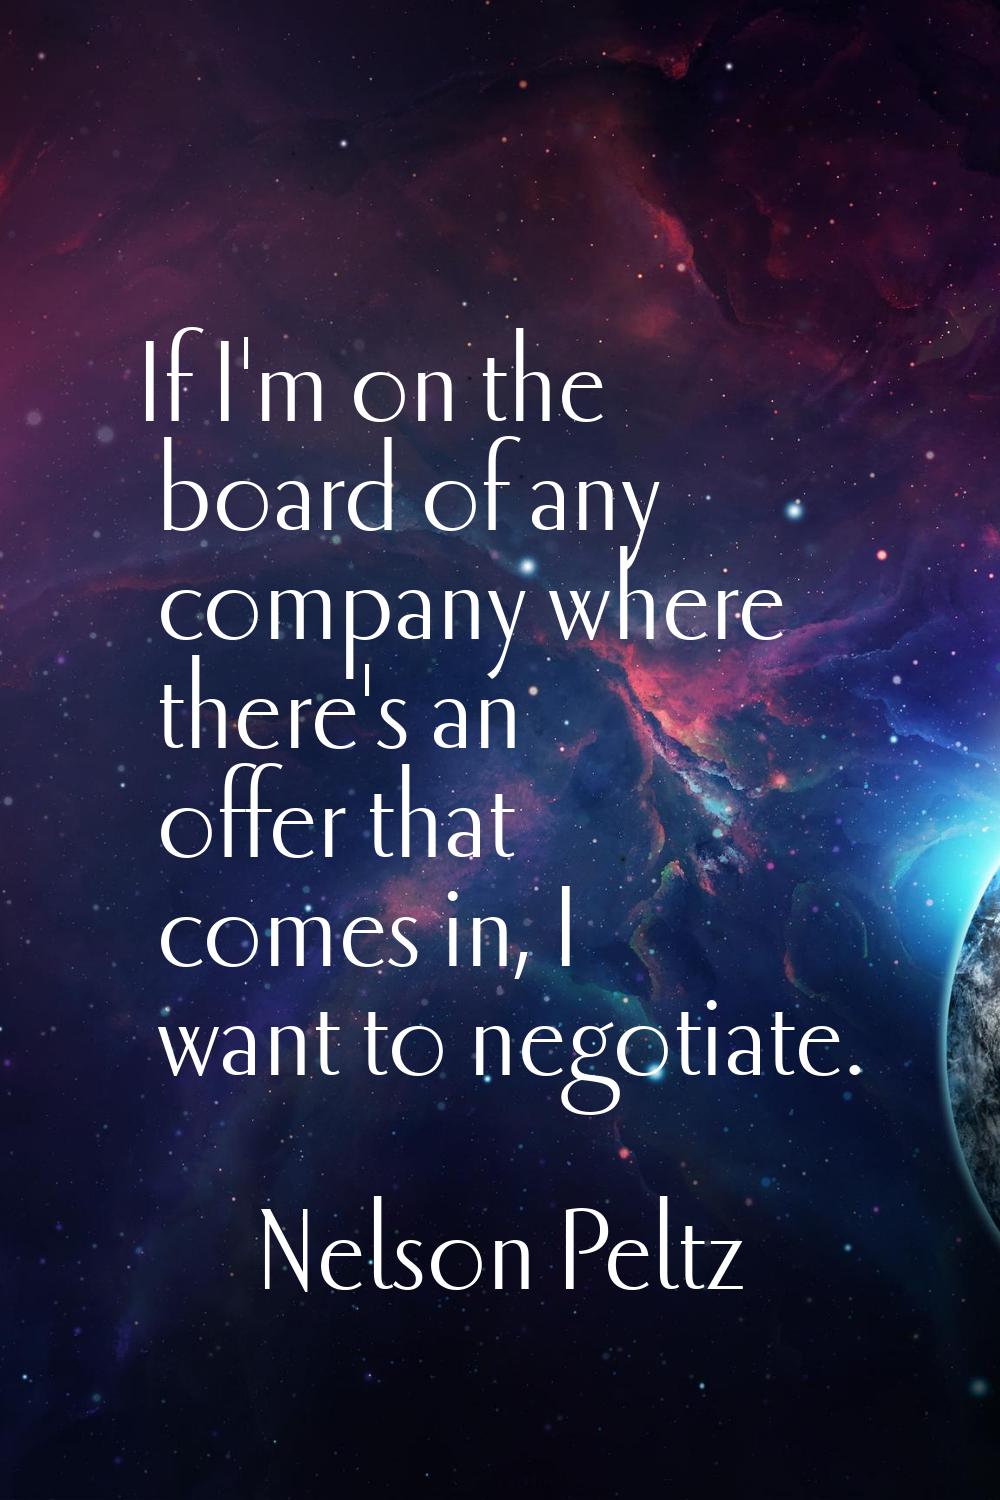 If I'm on the board of any company where there's an offer that comes in, I want to negotiate.